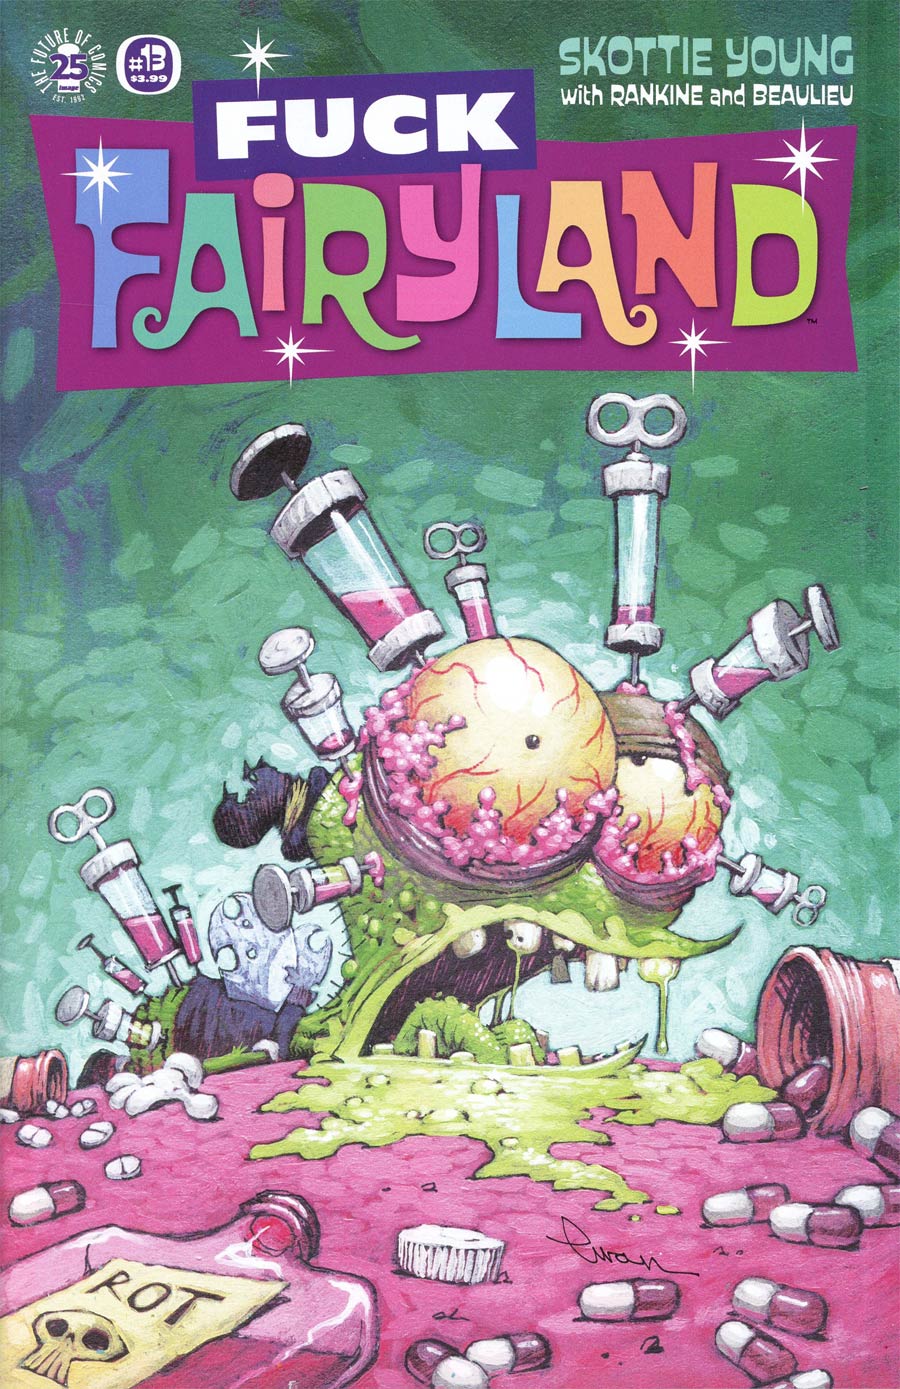 I Hate Fairyland #13 Cover B Variant Skottie Young F*ck Fairyland Cover